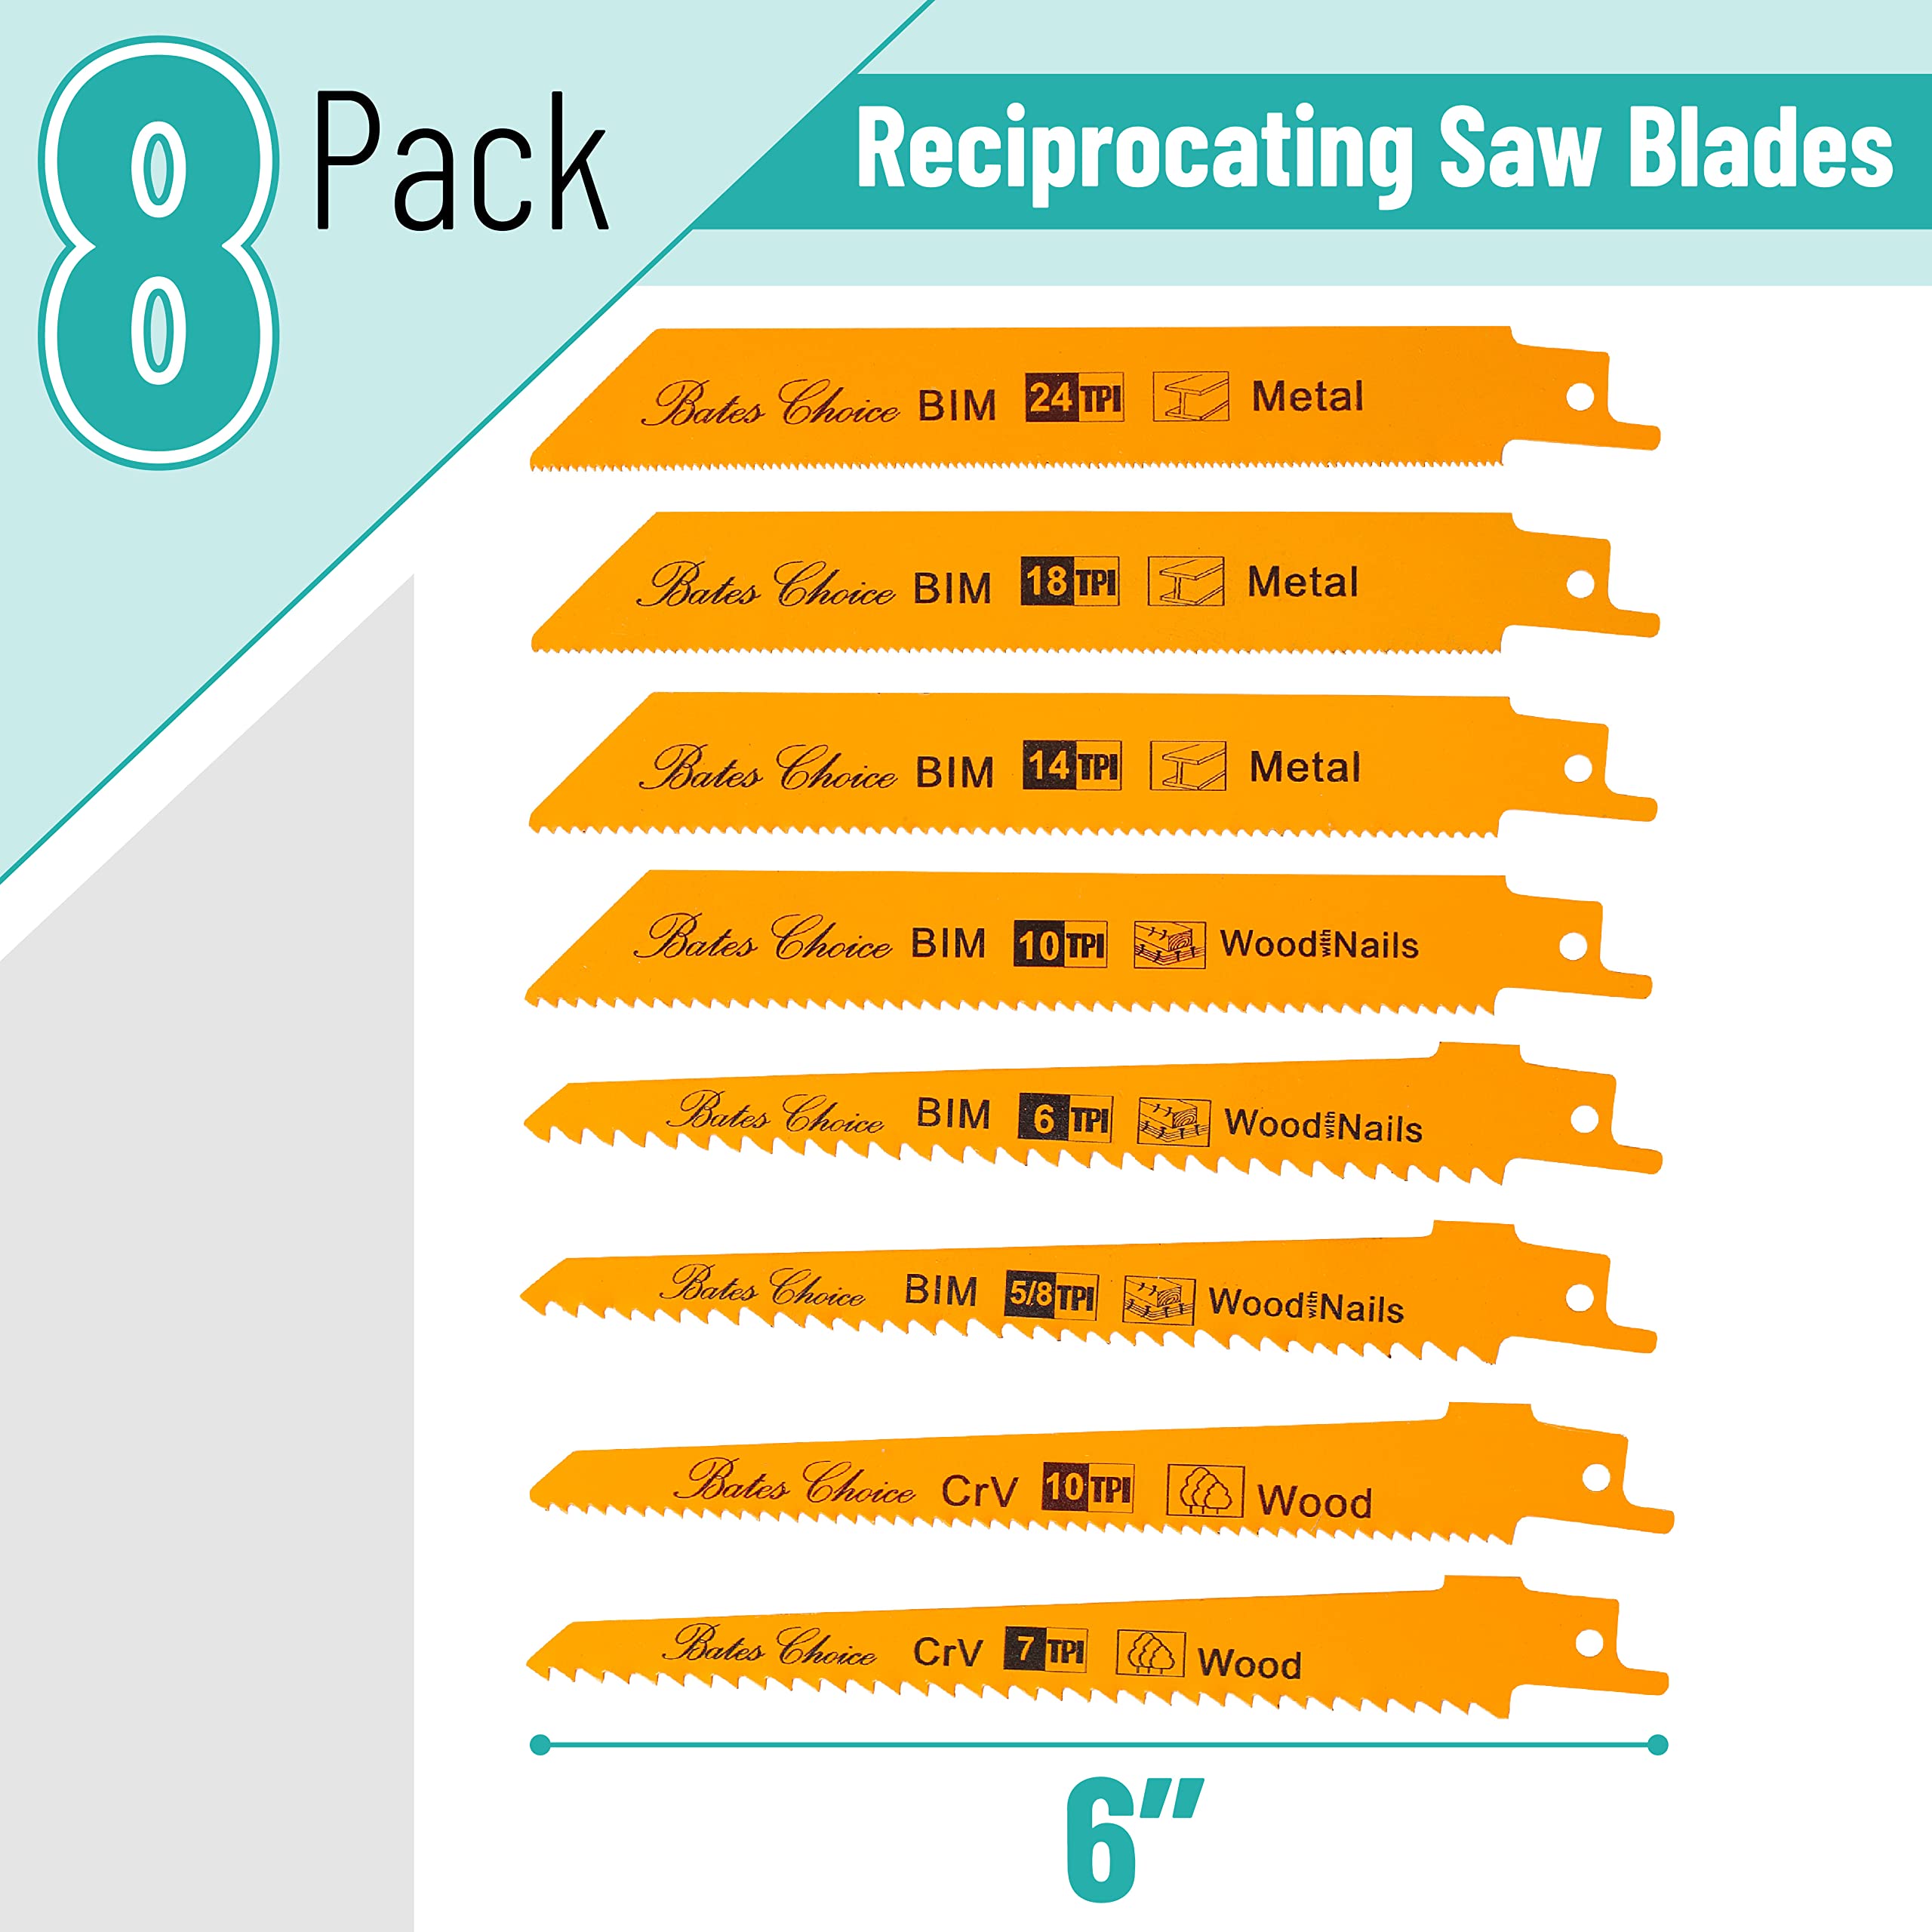 Bates- Reciprocating Saw Blades, 8 Pack, 6 inch, Saw Blade, Reciprocating Saw Blades Wood, Reciprocating Saw Blades Metal, Saw Blades Reciprocating Saw, Metal Cutting Reciprocating Saw Blades